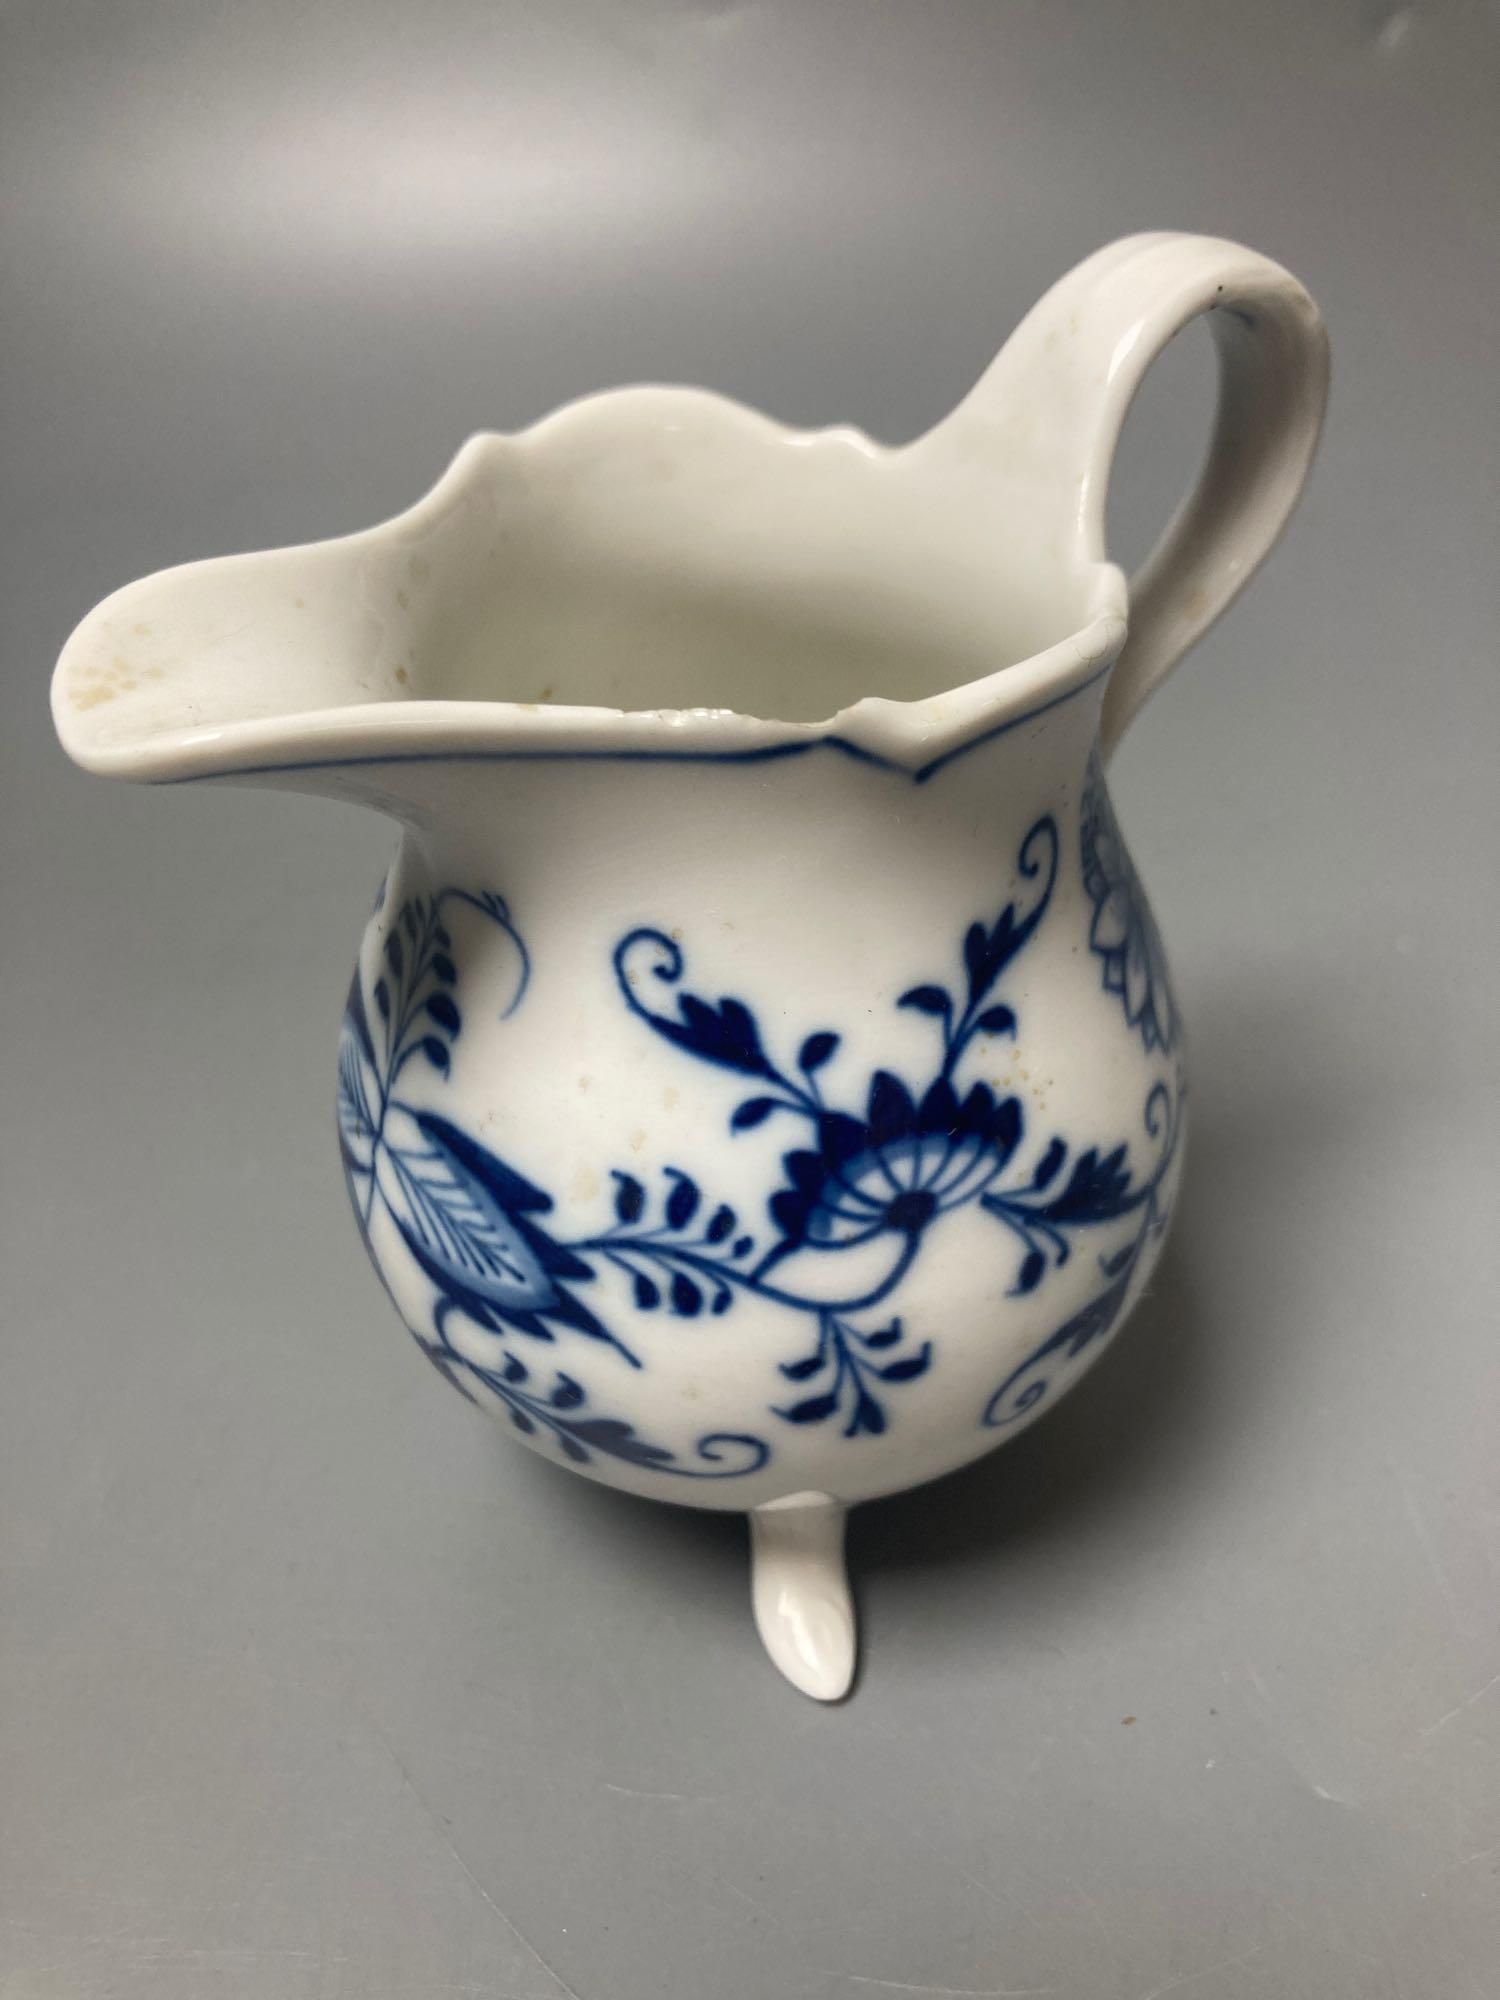 A Meissen blue and white onion pattern jug and a similar leaf shaped pickle dish (2)